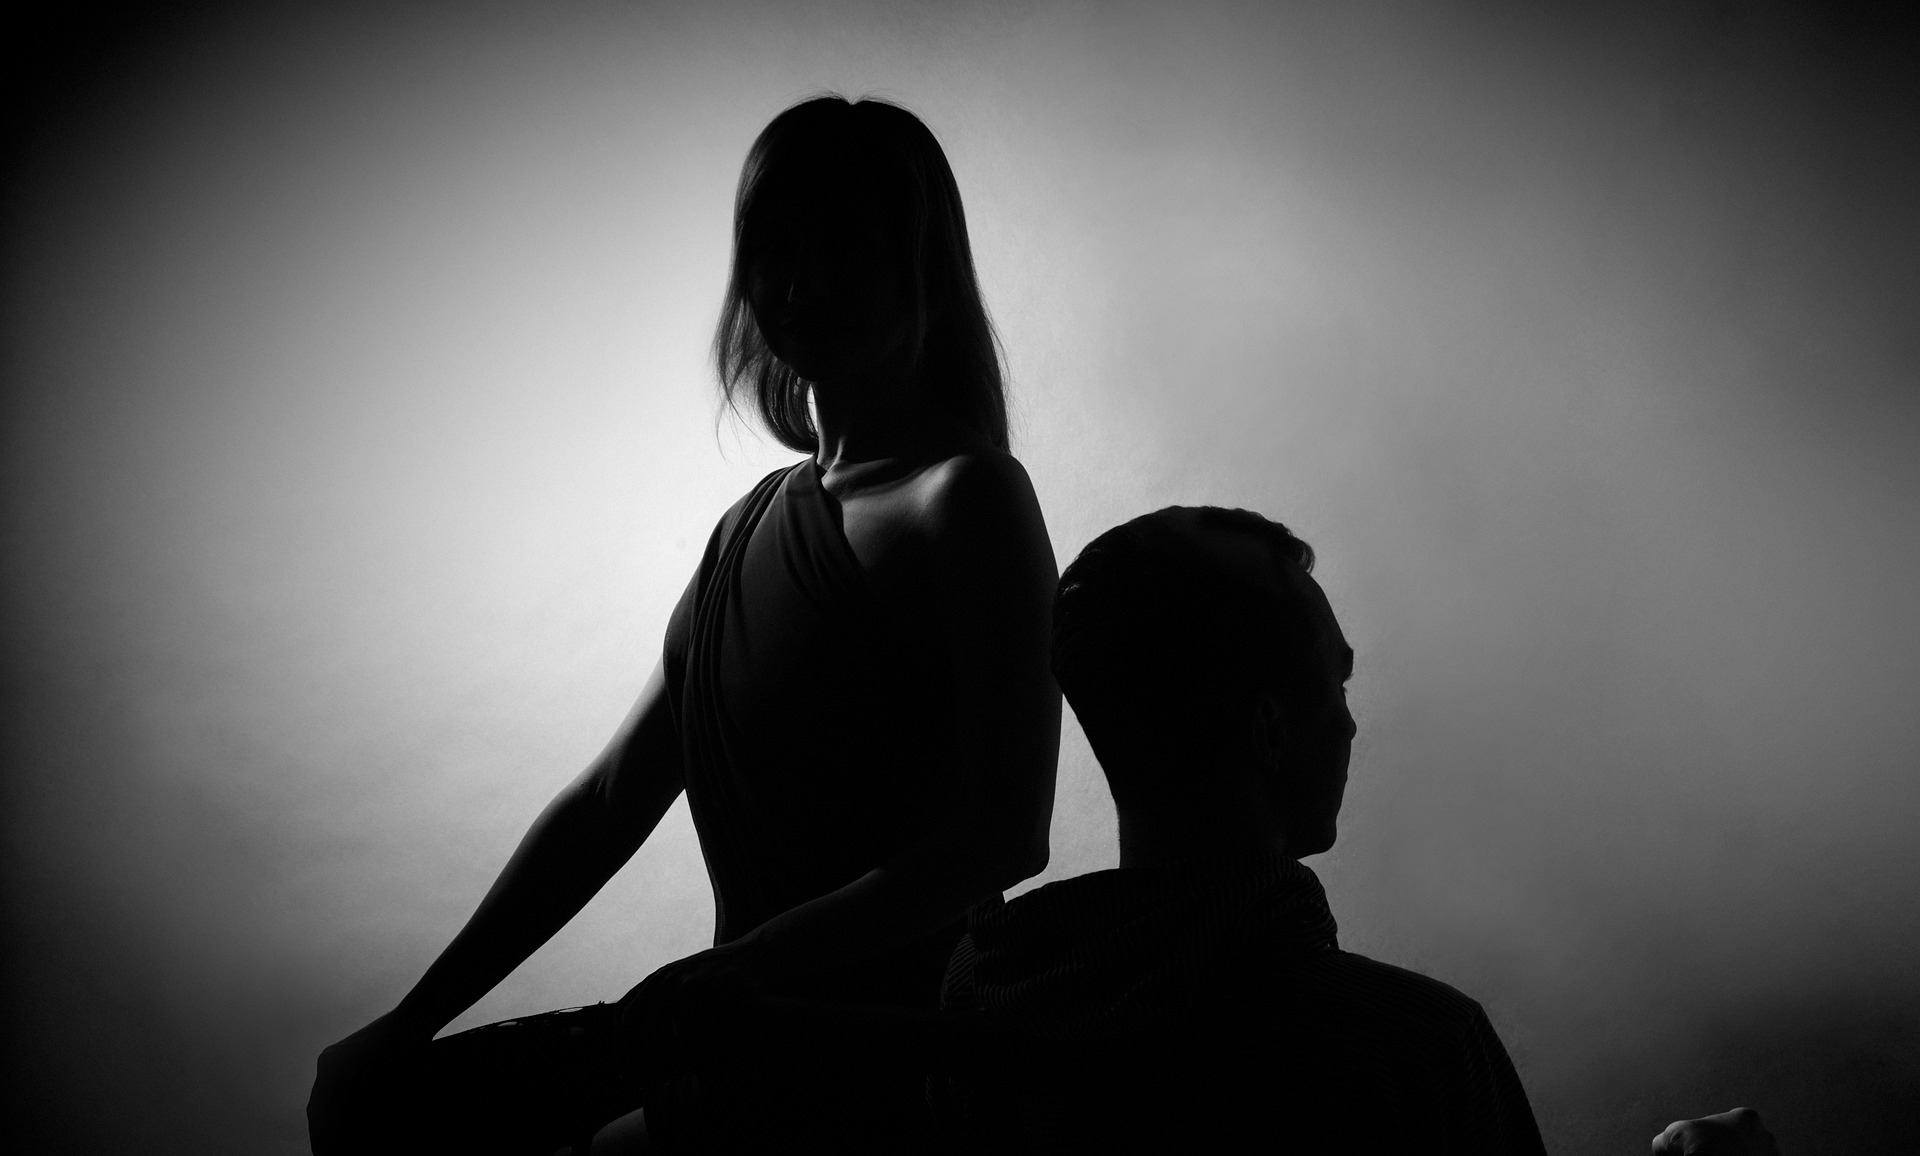 Black and white image showing man and woman turned away from each other in the shadows.